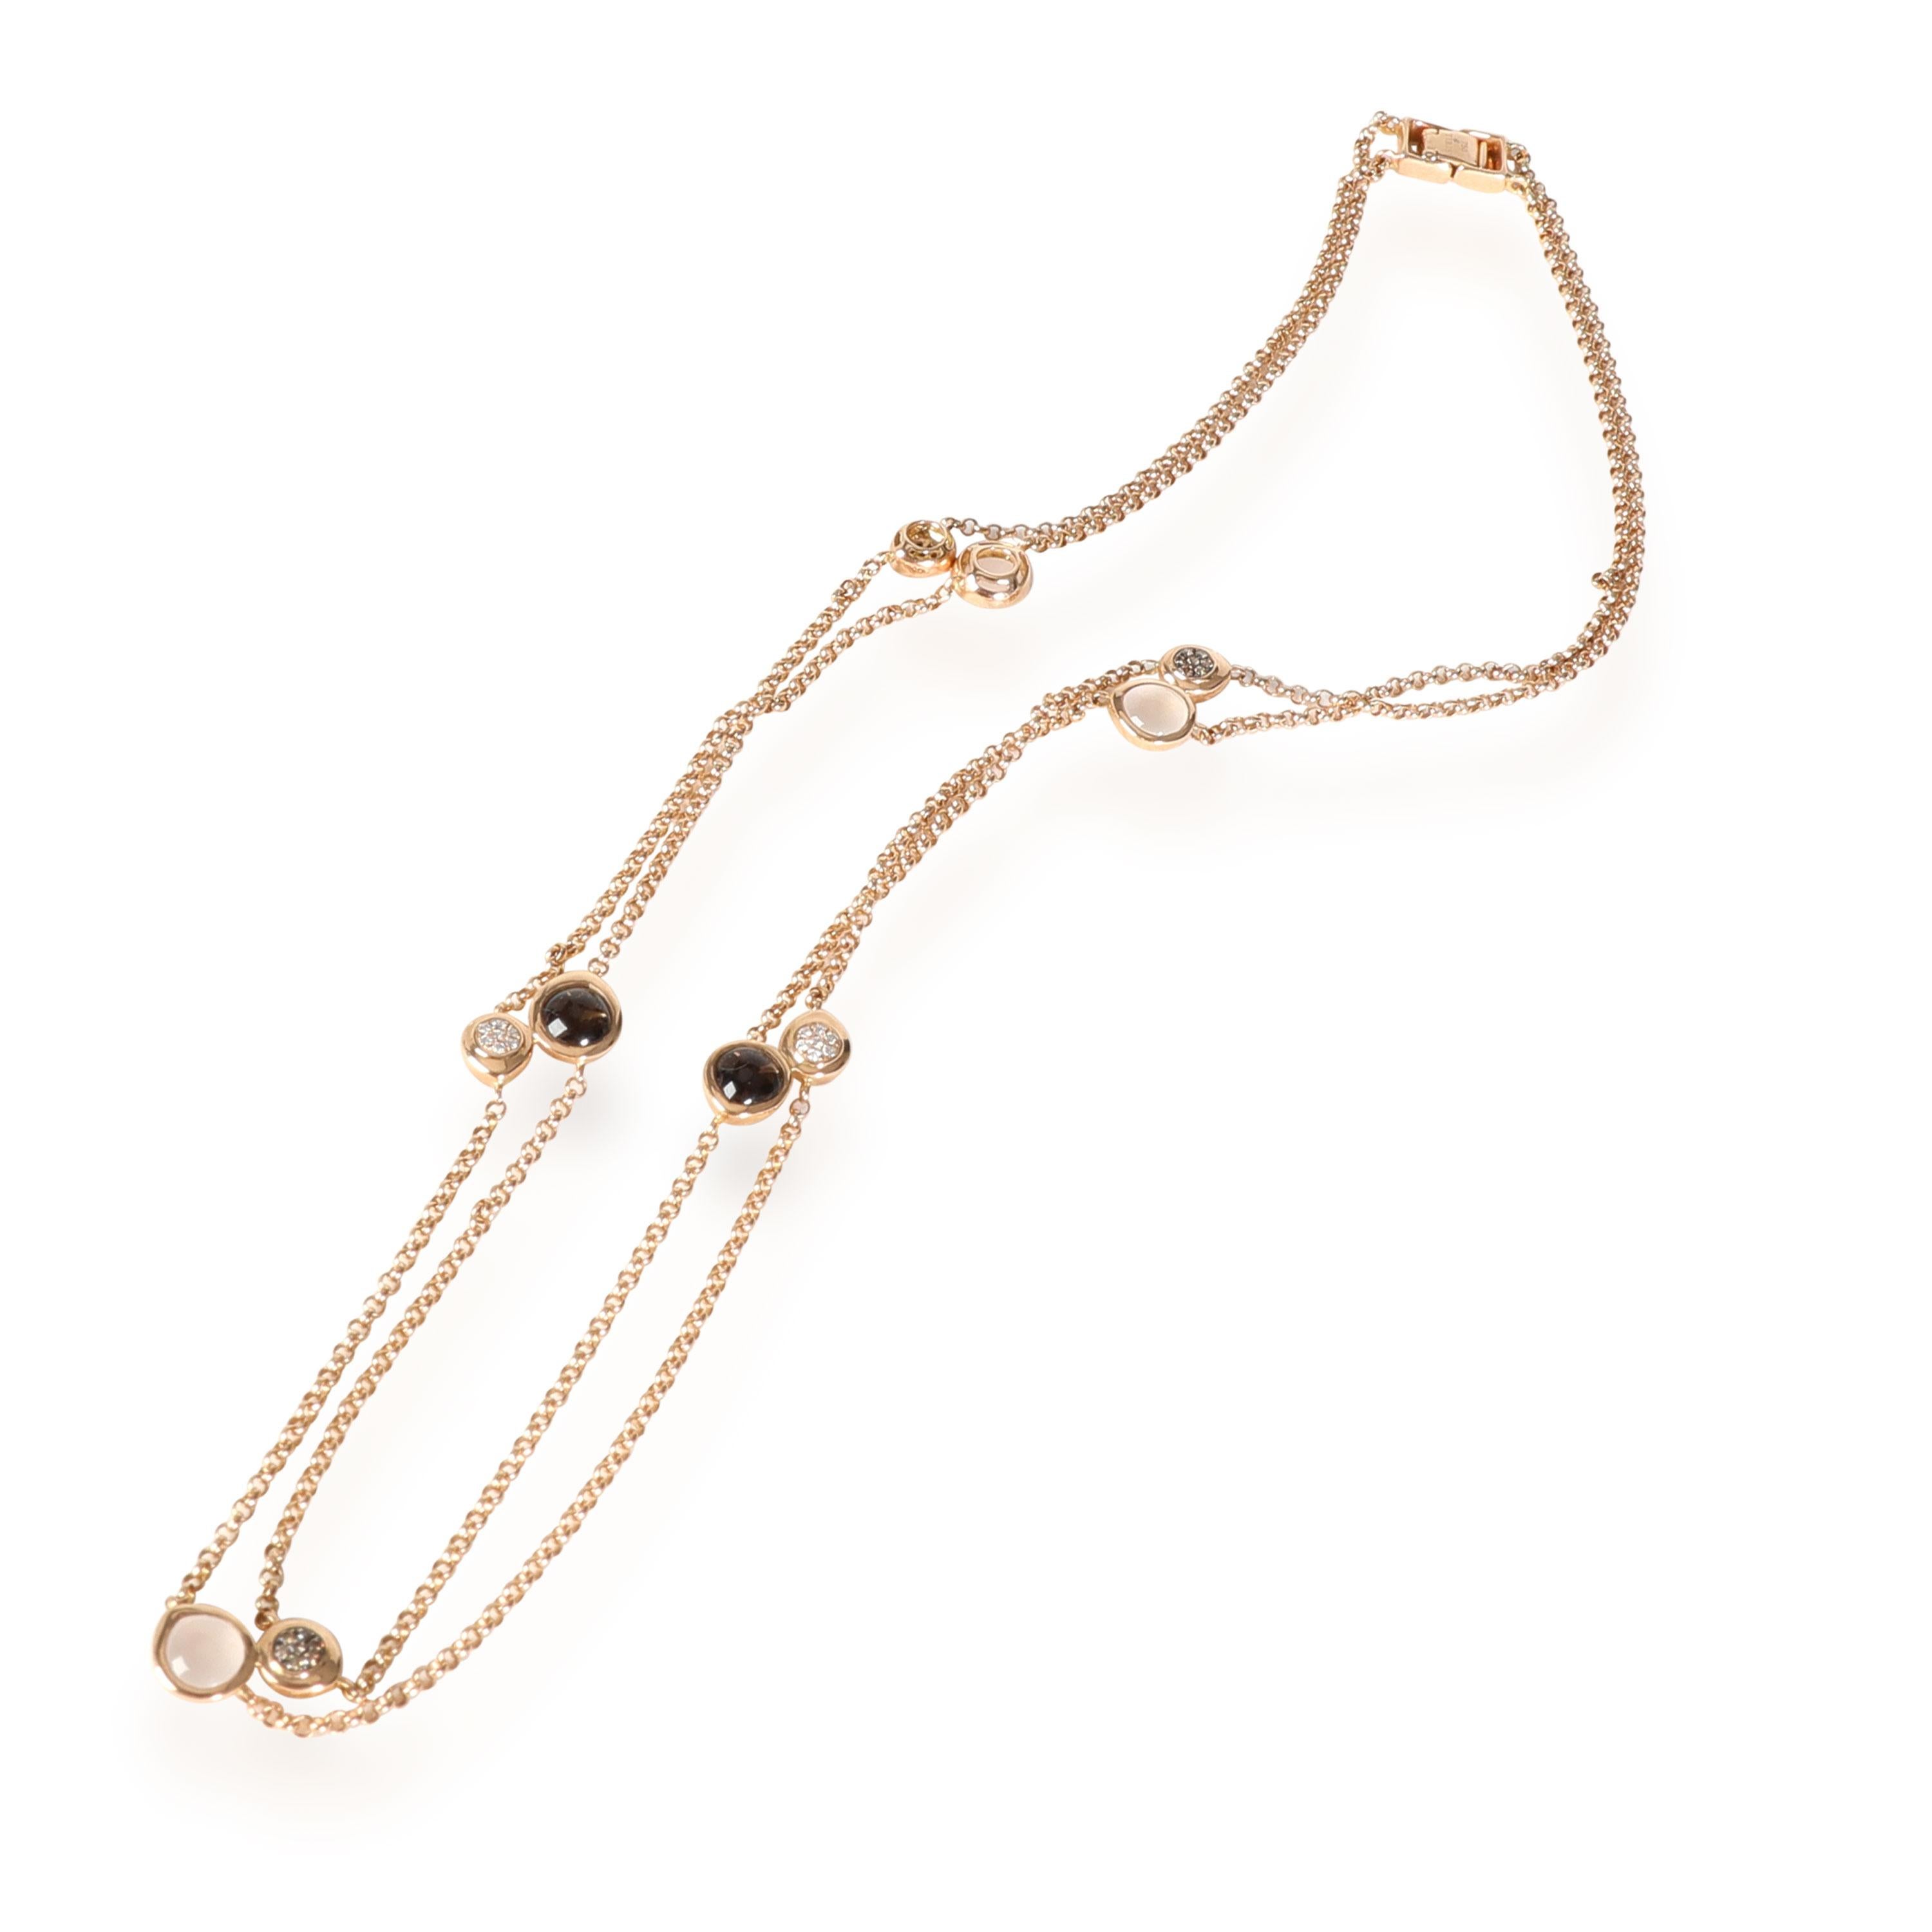 Tirisi Double Strand Quartz Diamond Necklace in 18K Rose Gold, 0.18 CTW

PRIMARY DETAILS
SKU: 115174
Listing Title: Tirisi Double Strand Quartz Diamond Necklace in 18K Rose Gold, 0.18 CTW
Condition Description: Retails for 5295 USD. In excellent